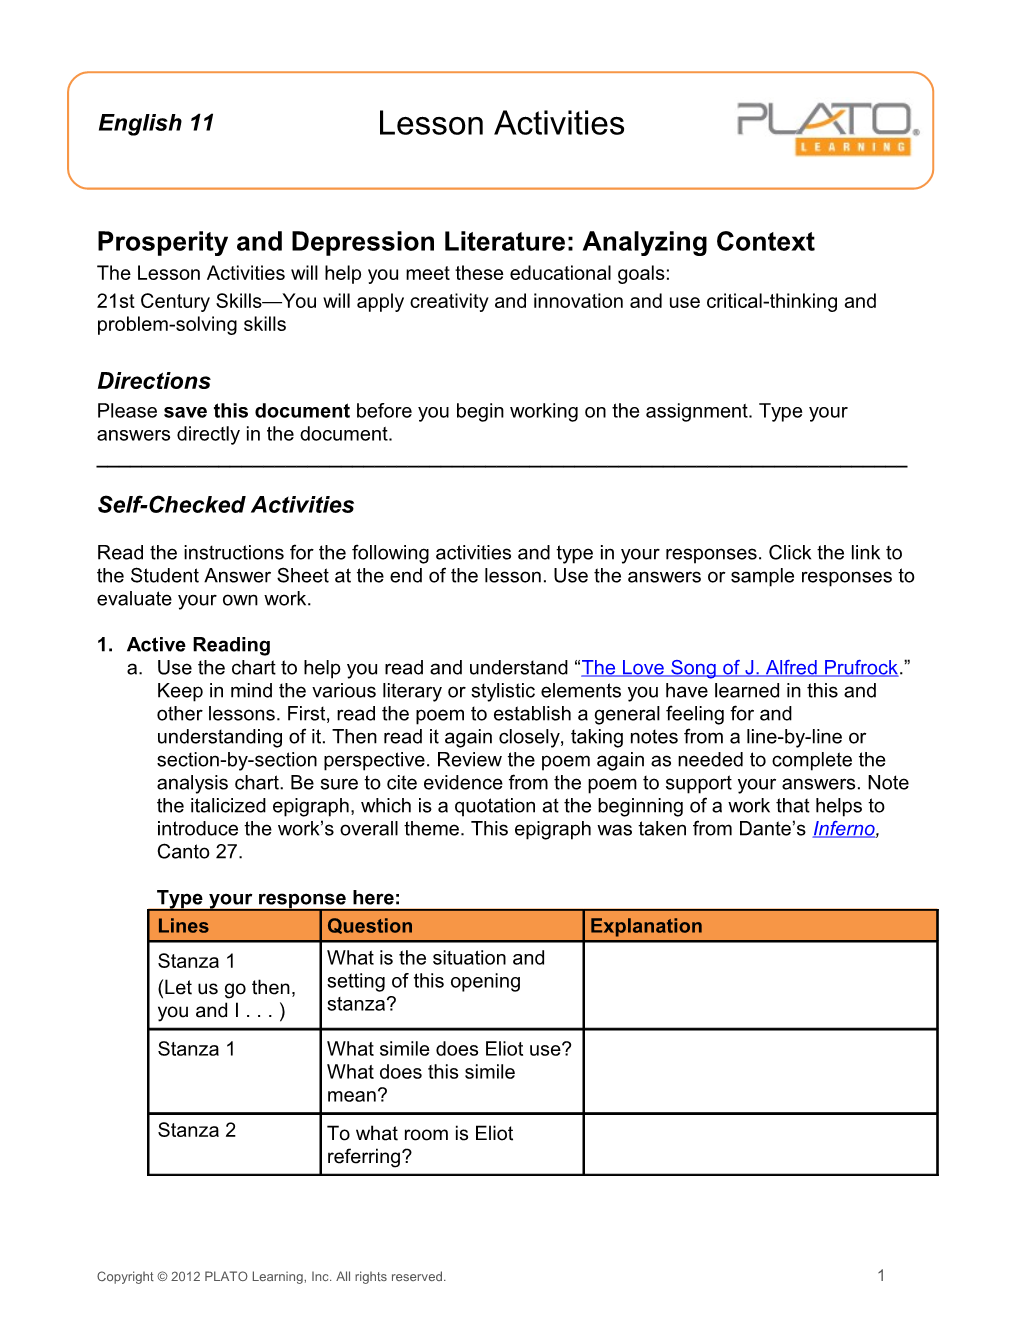 Prosperity and Depression Literature: Analyzing Context